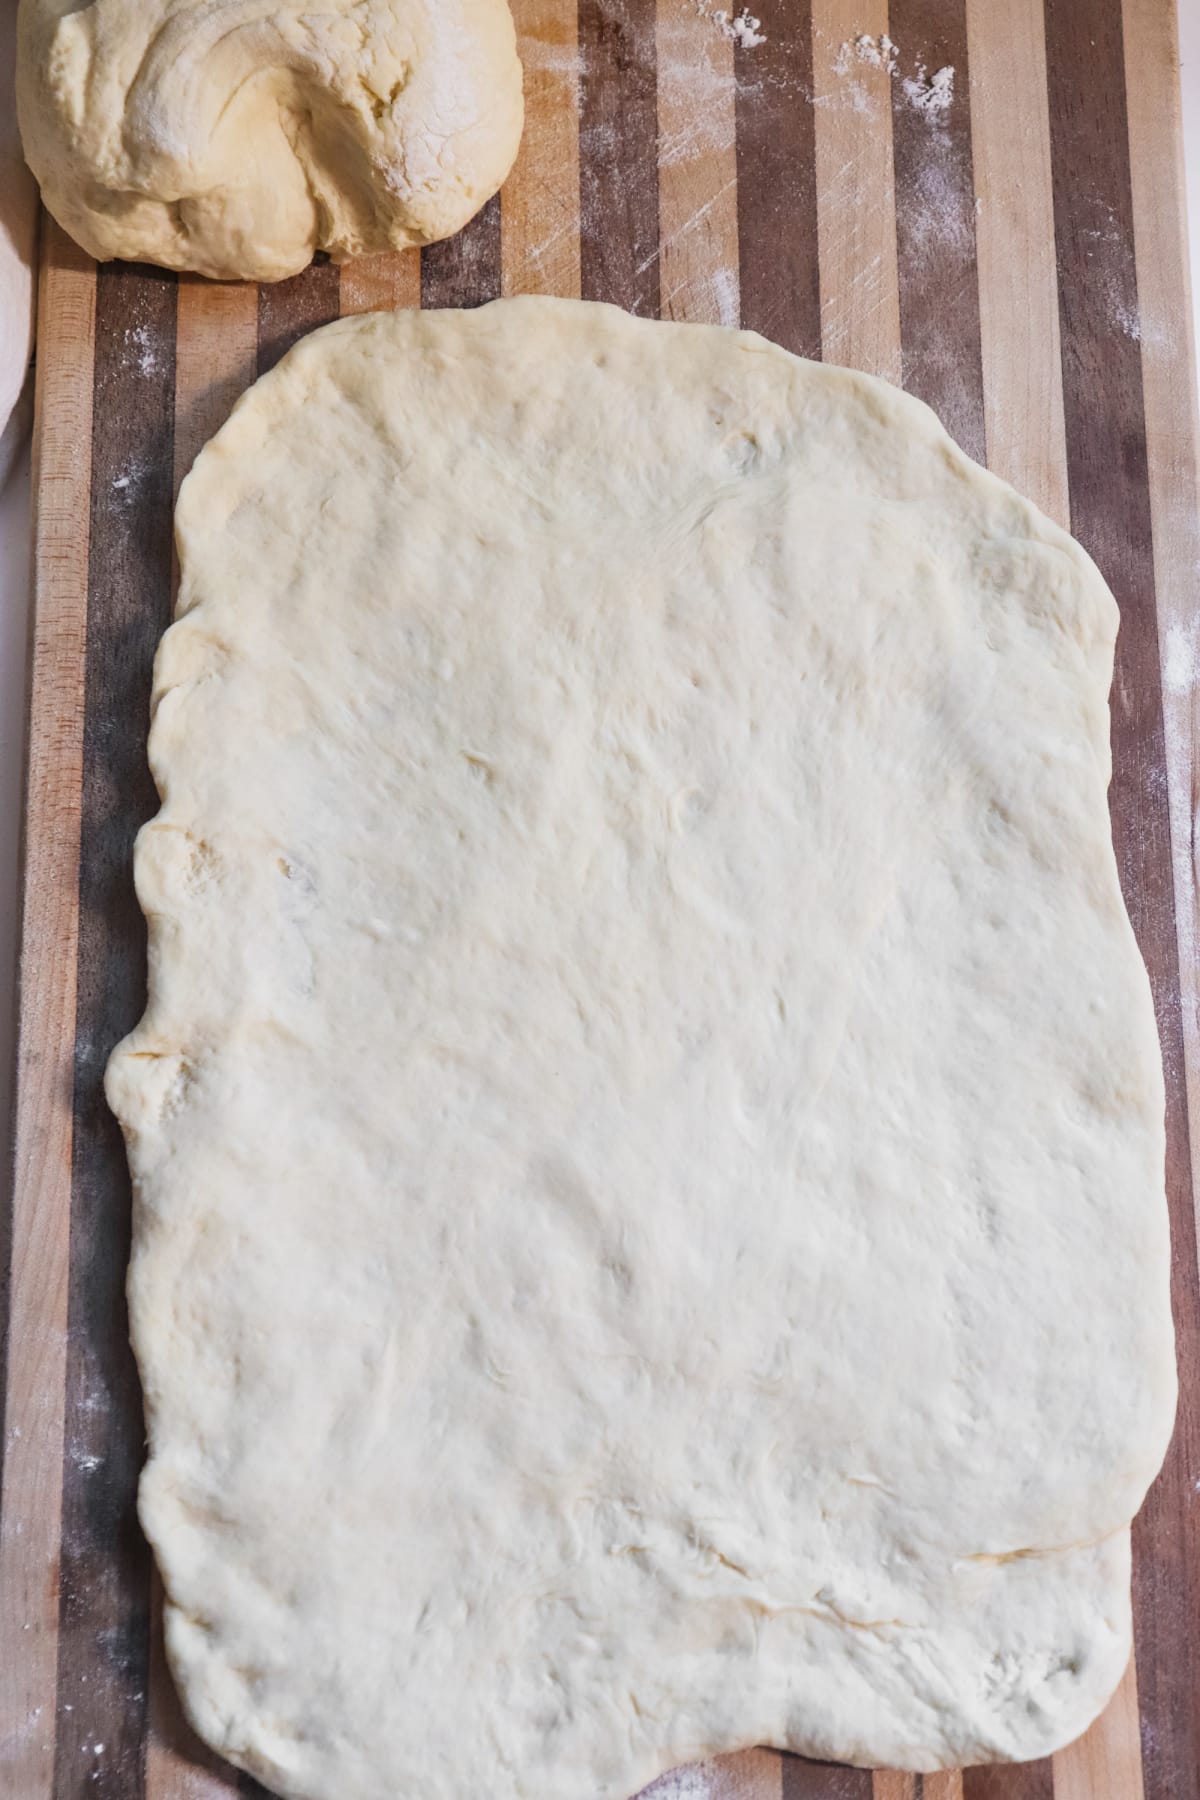 Dough stretched on cutting board